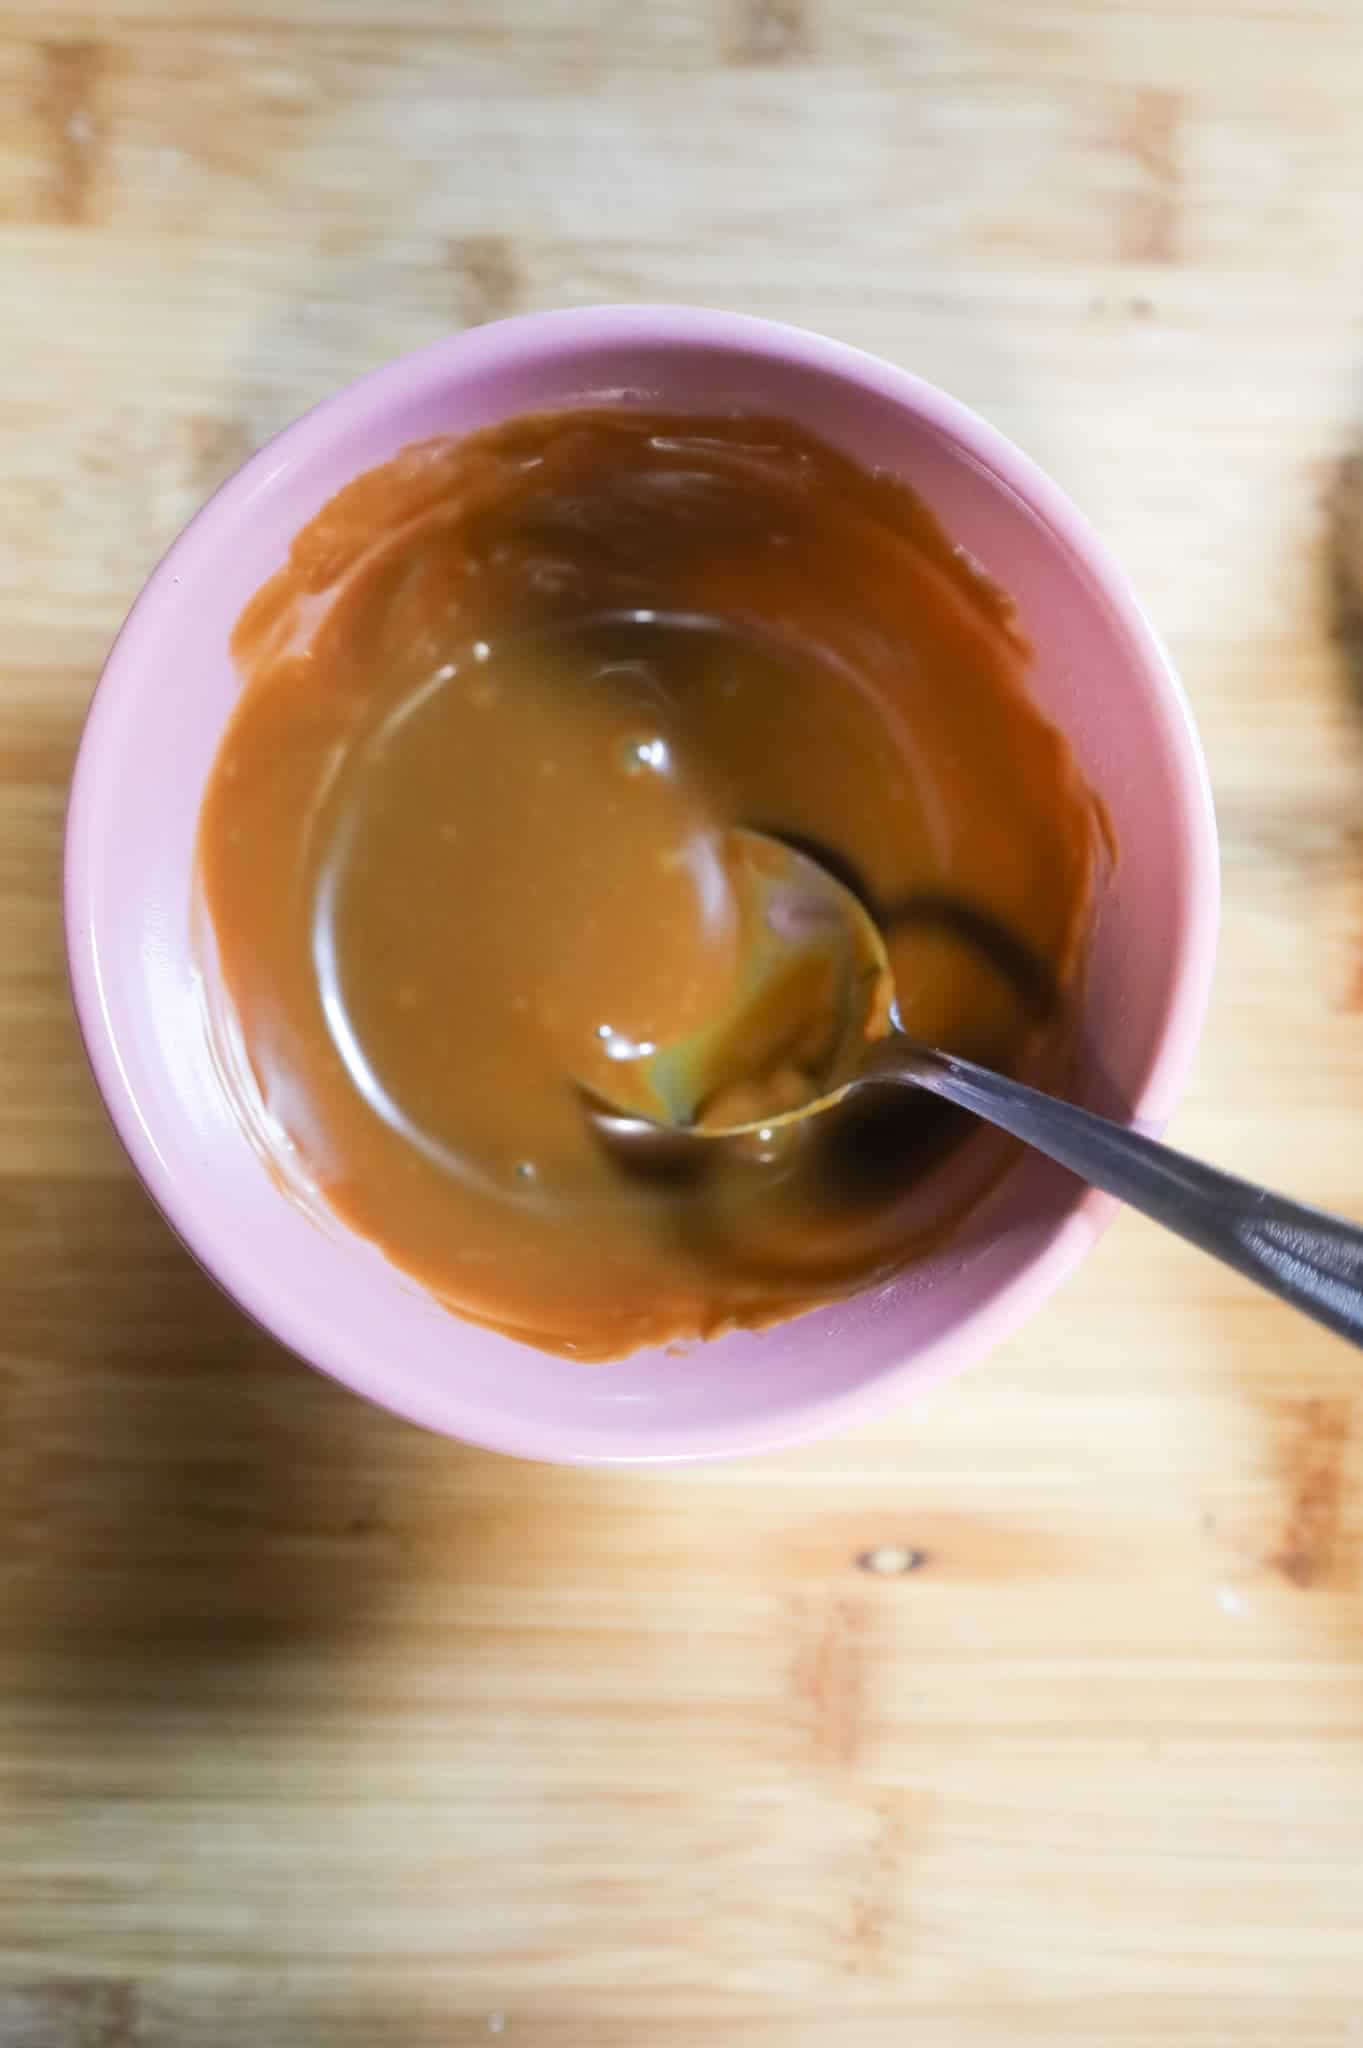 melted dulce de leche in a small bowl